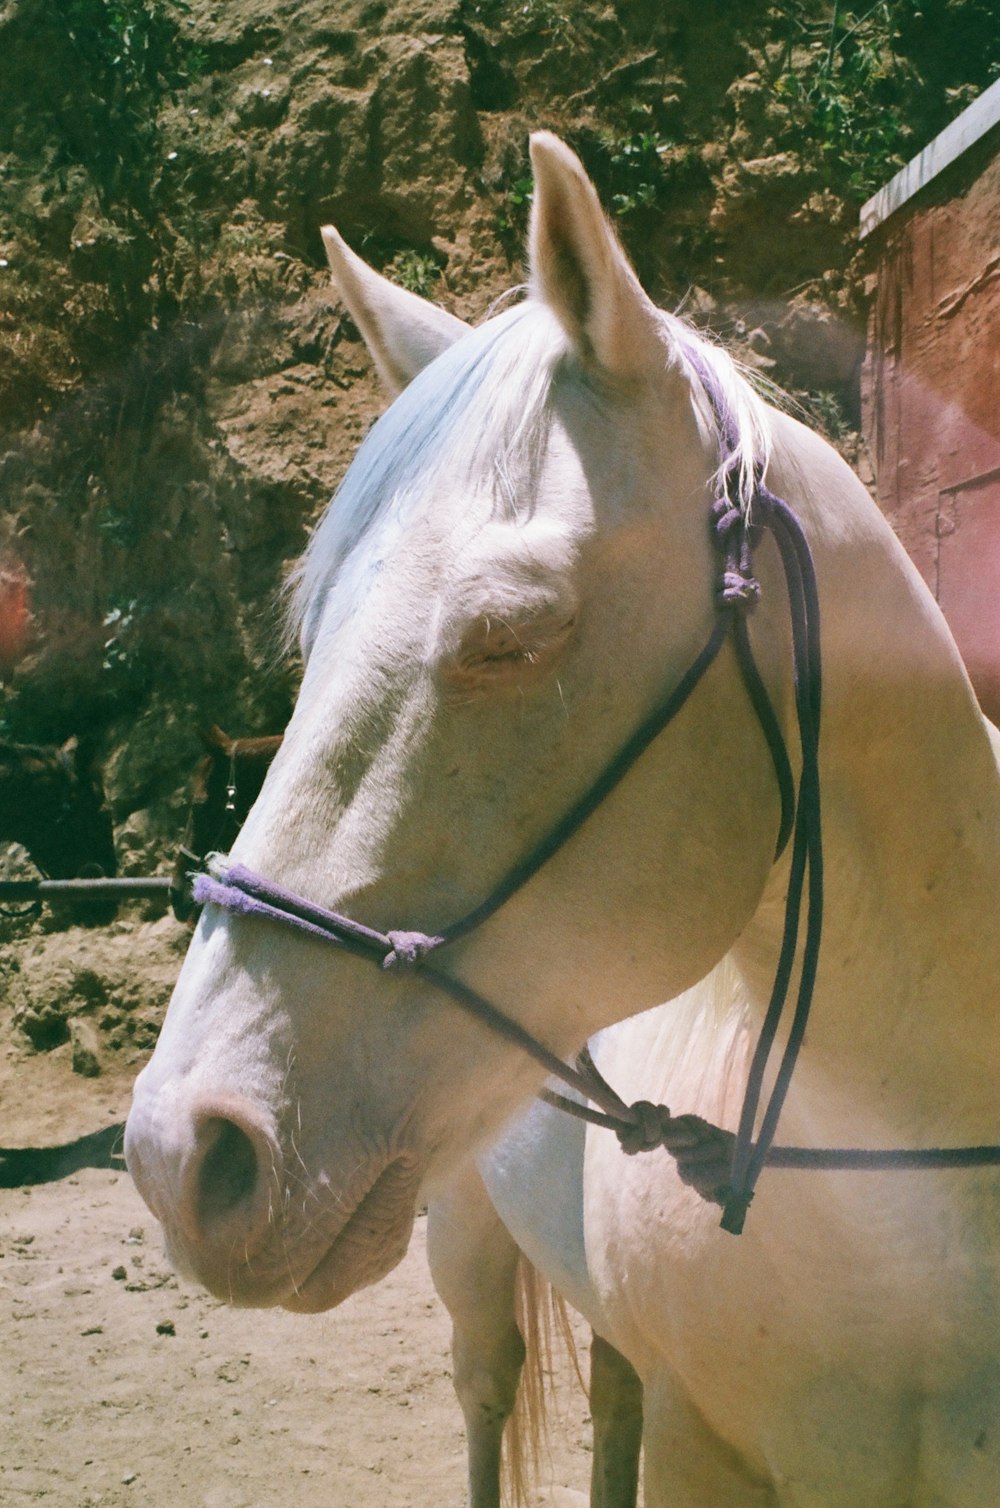 a close up of a white horse with a bridle